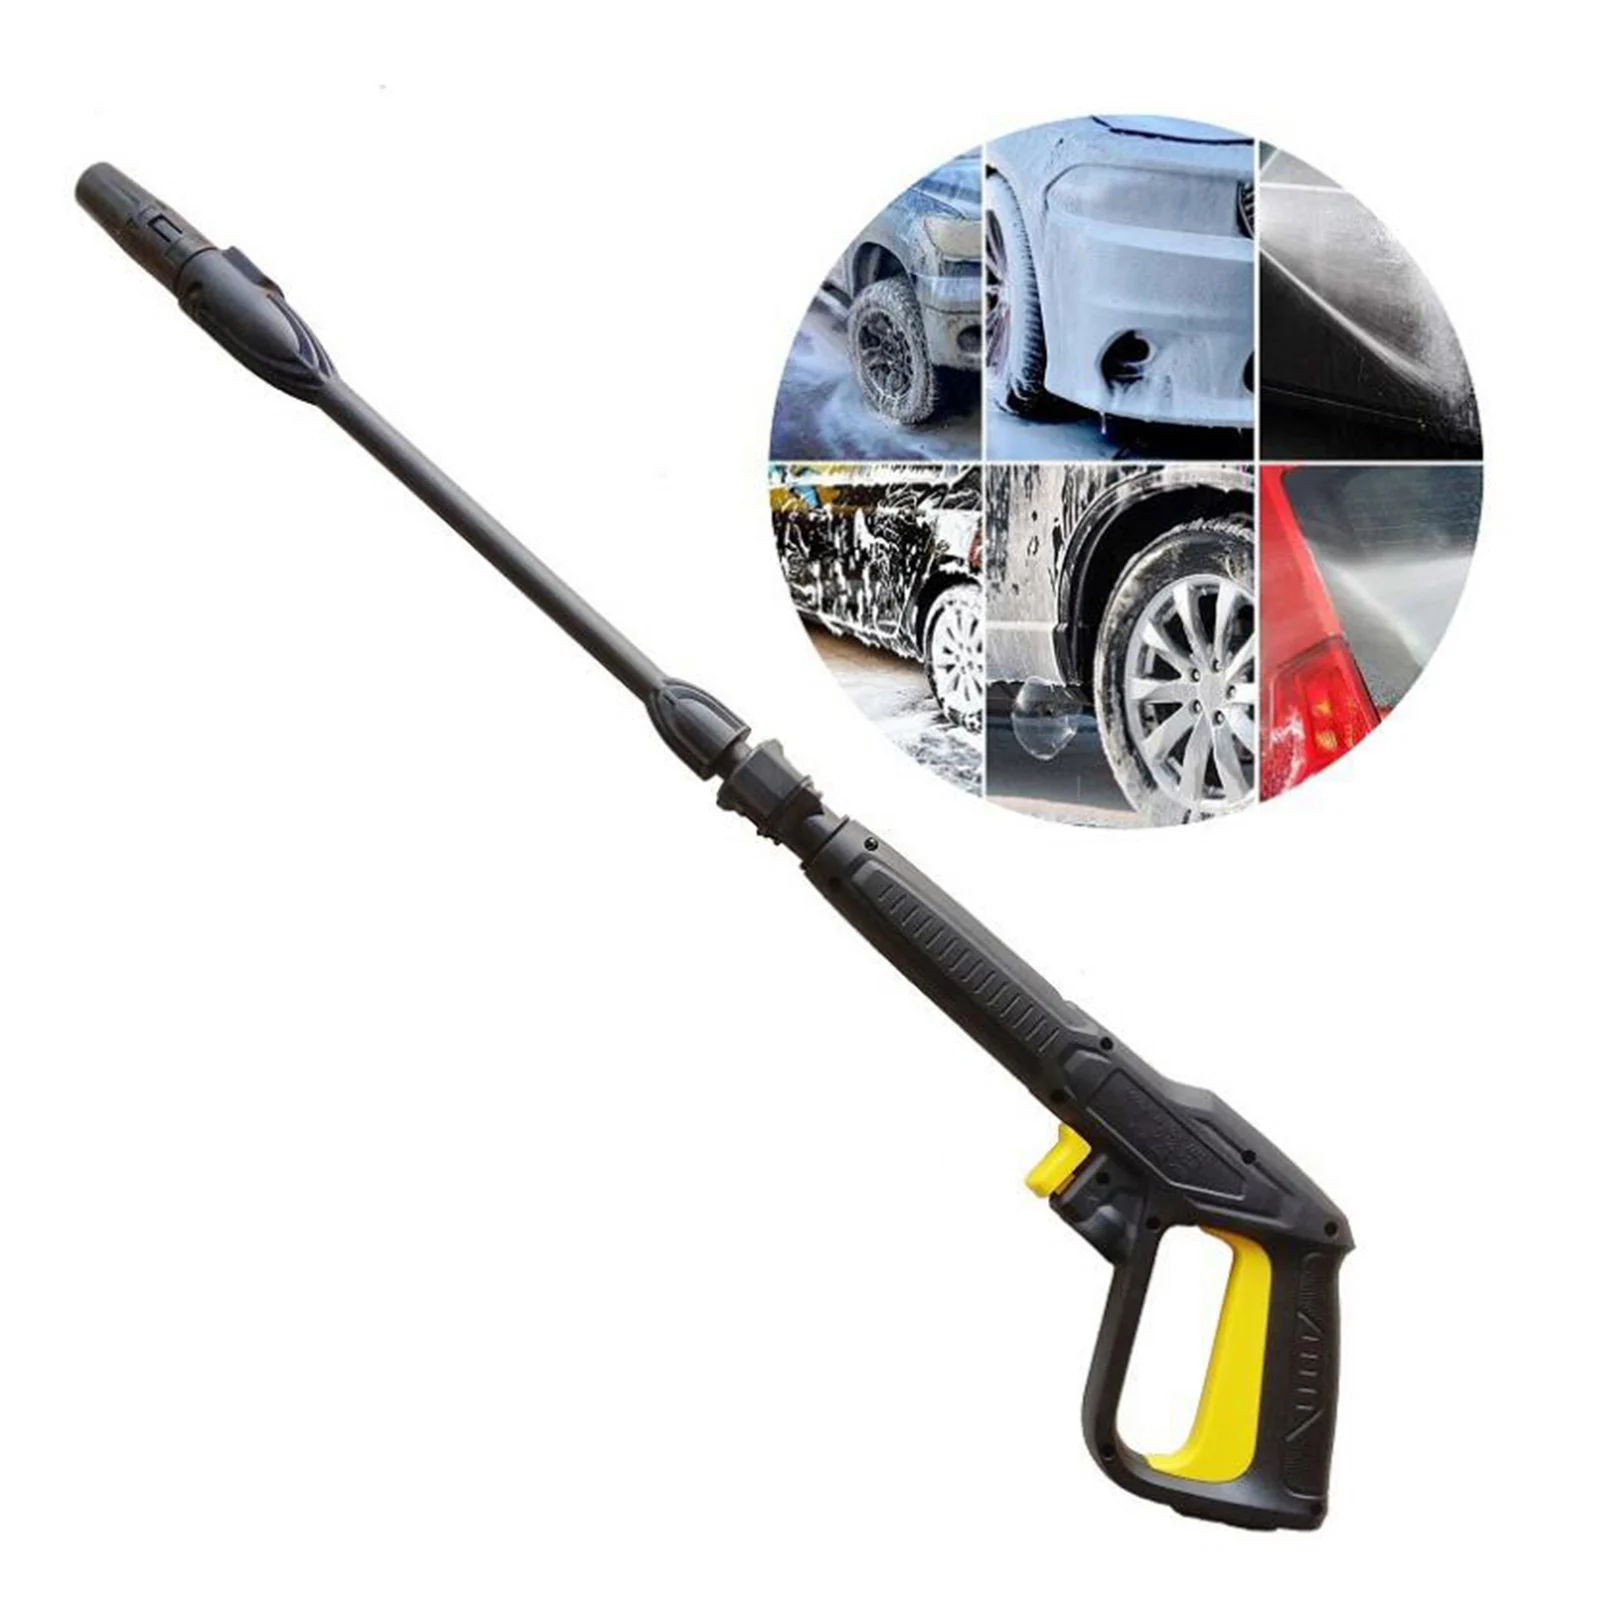 Replacement Pressure Washer Gun 2175 PSI with Extension Wand Nozzles for Karcher K-series Garden Watering Roof Cleaning